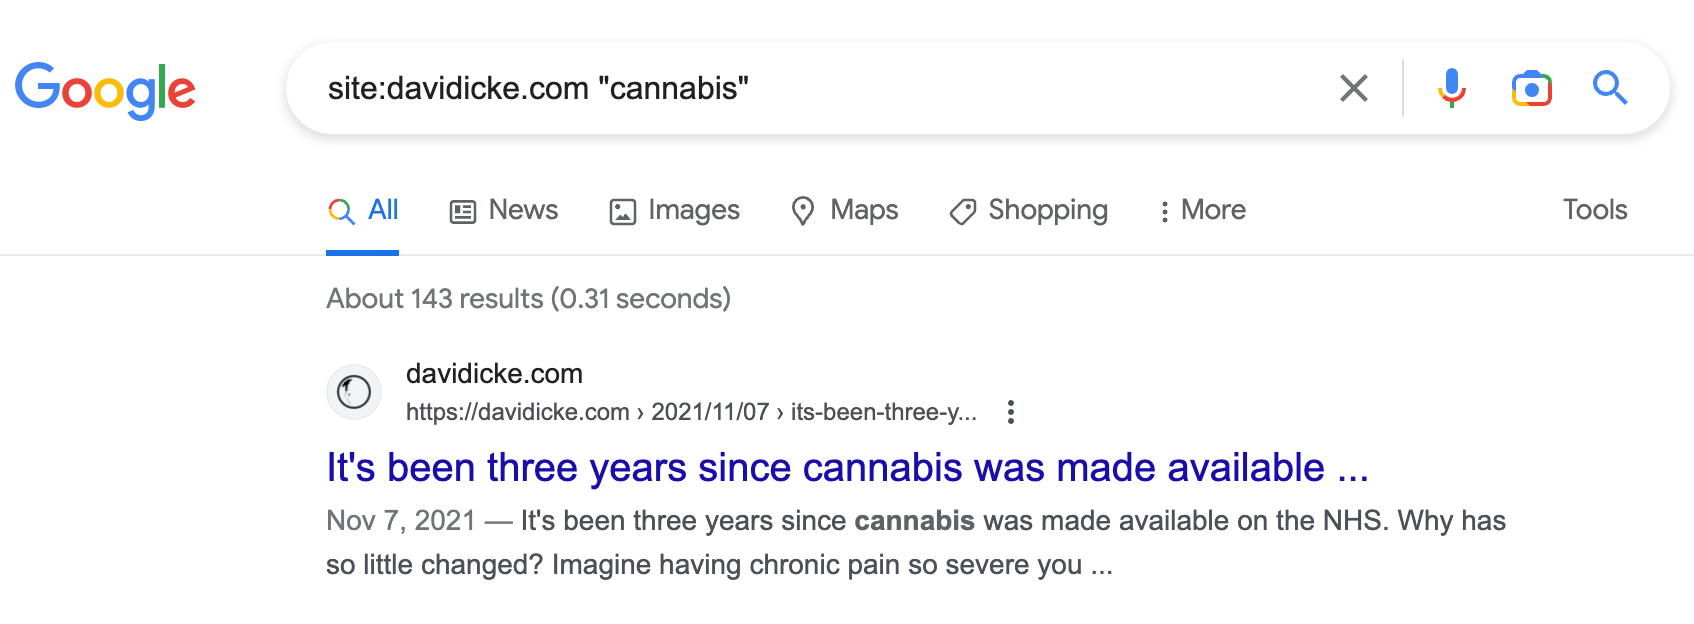 Using the "site:" operator and searching articles for the search term "cannabis"